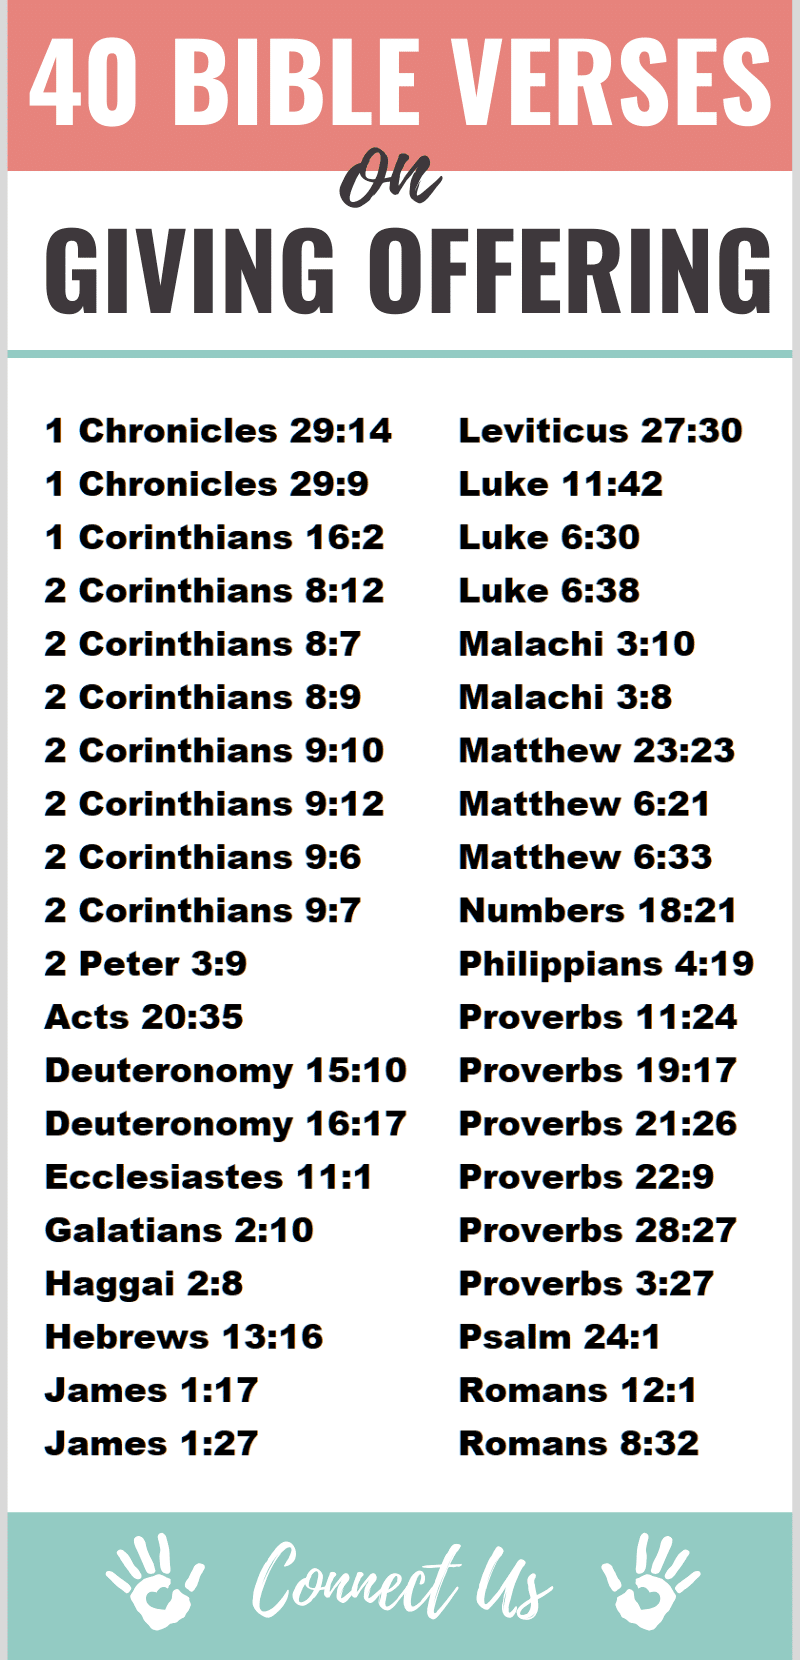 Bible Verses on Giving Offering